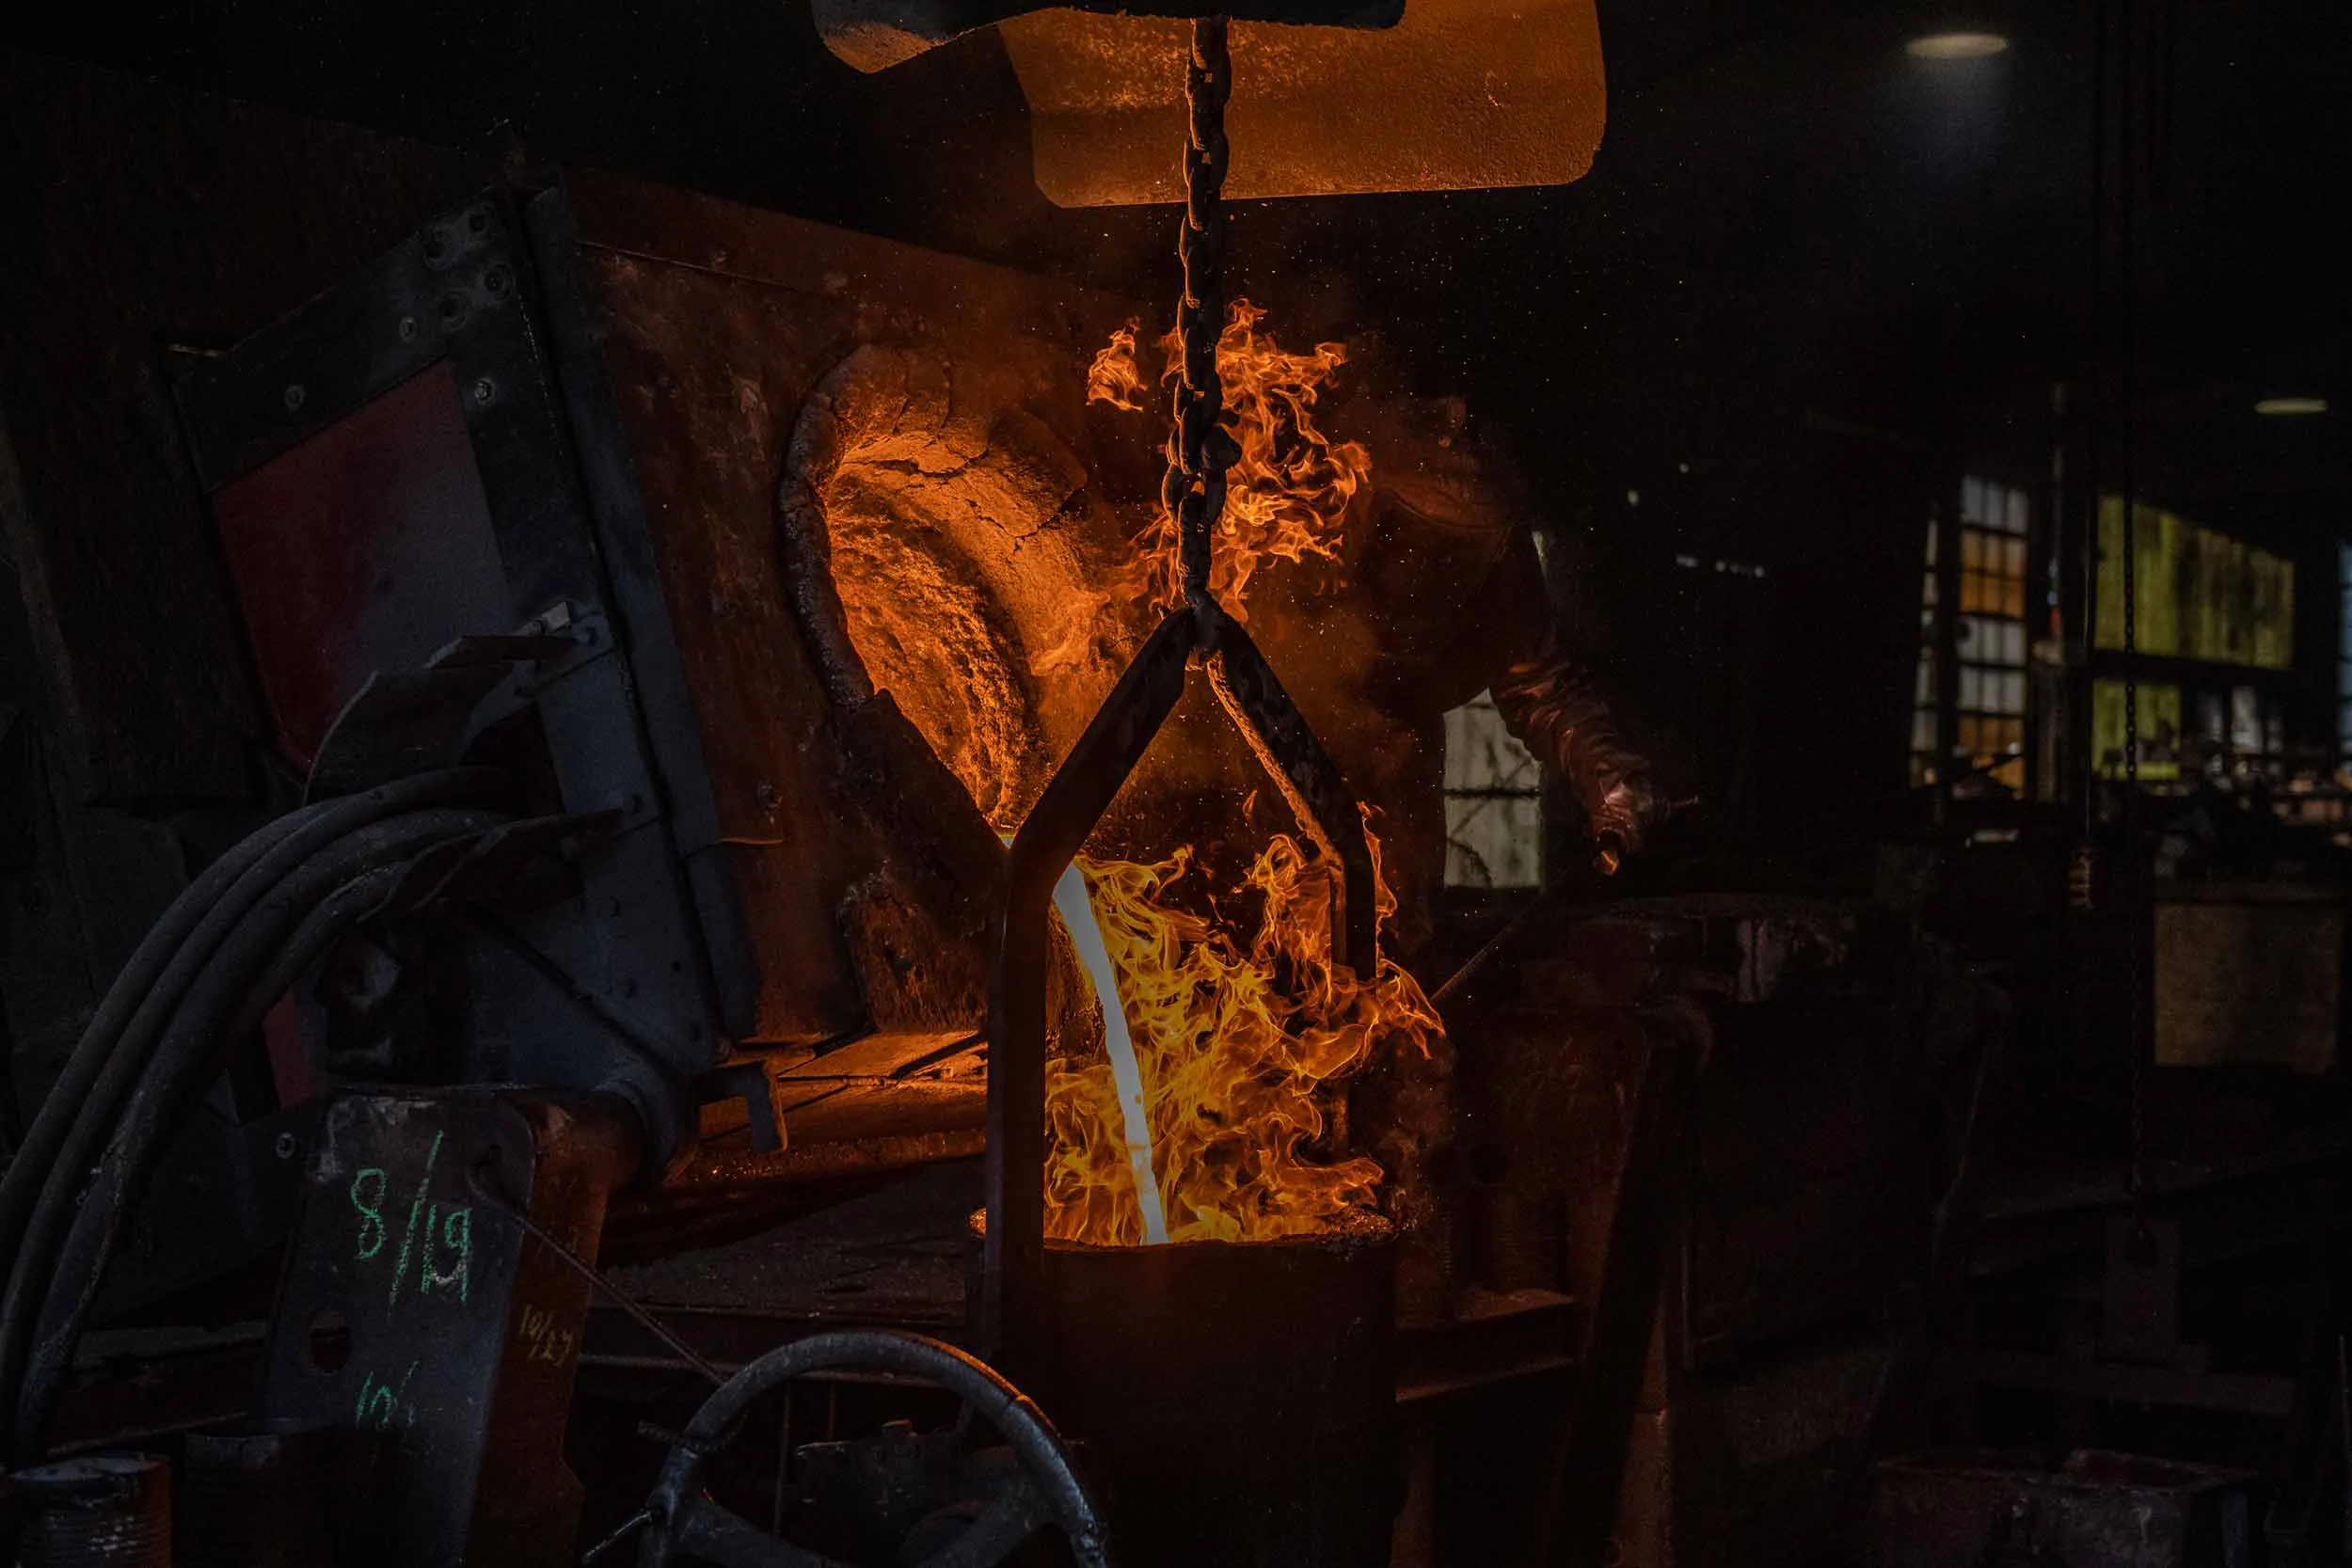 Molten iron flowing into the bucket for pouring